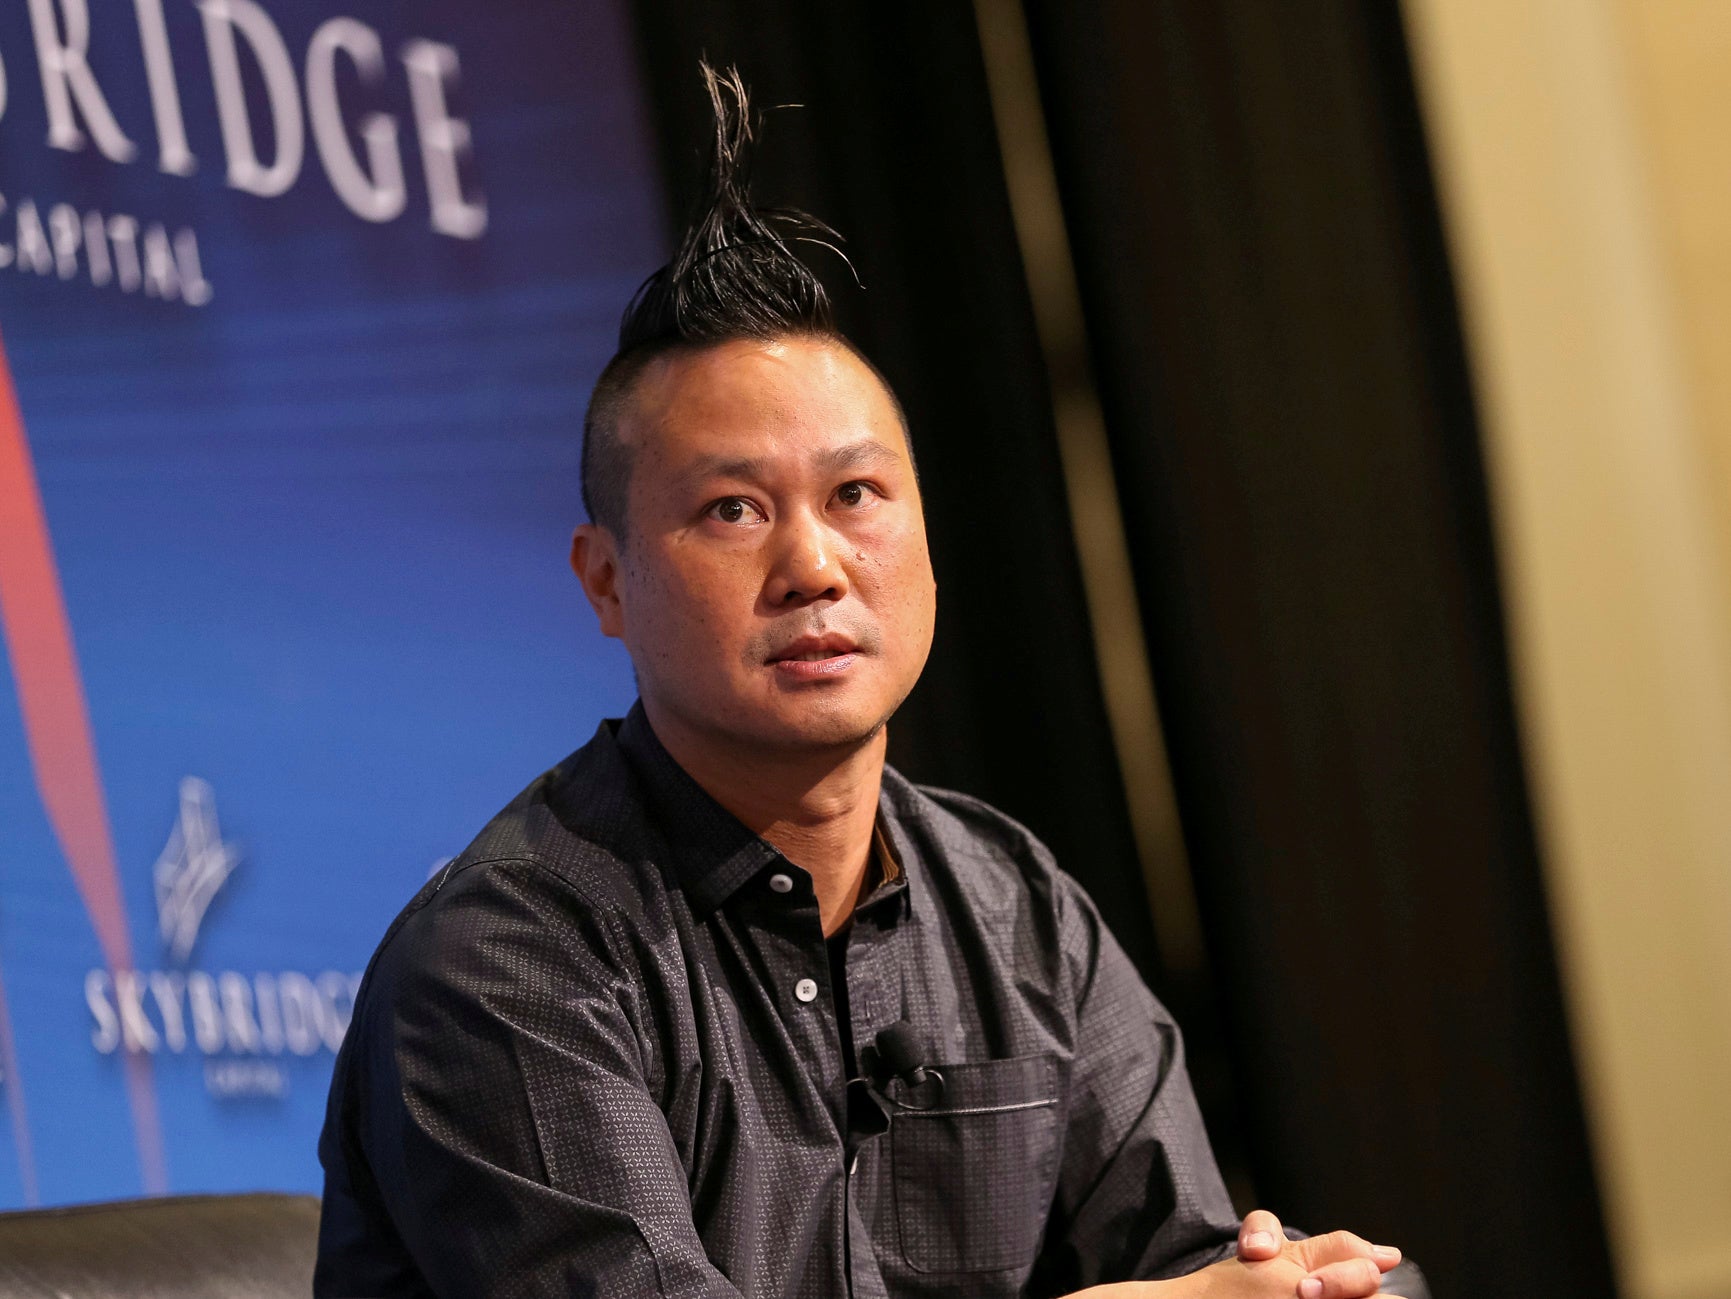 Tony Hsieh, former CEO of Zappos, in 2017